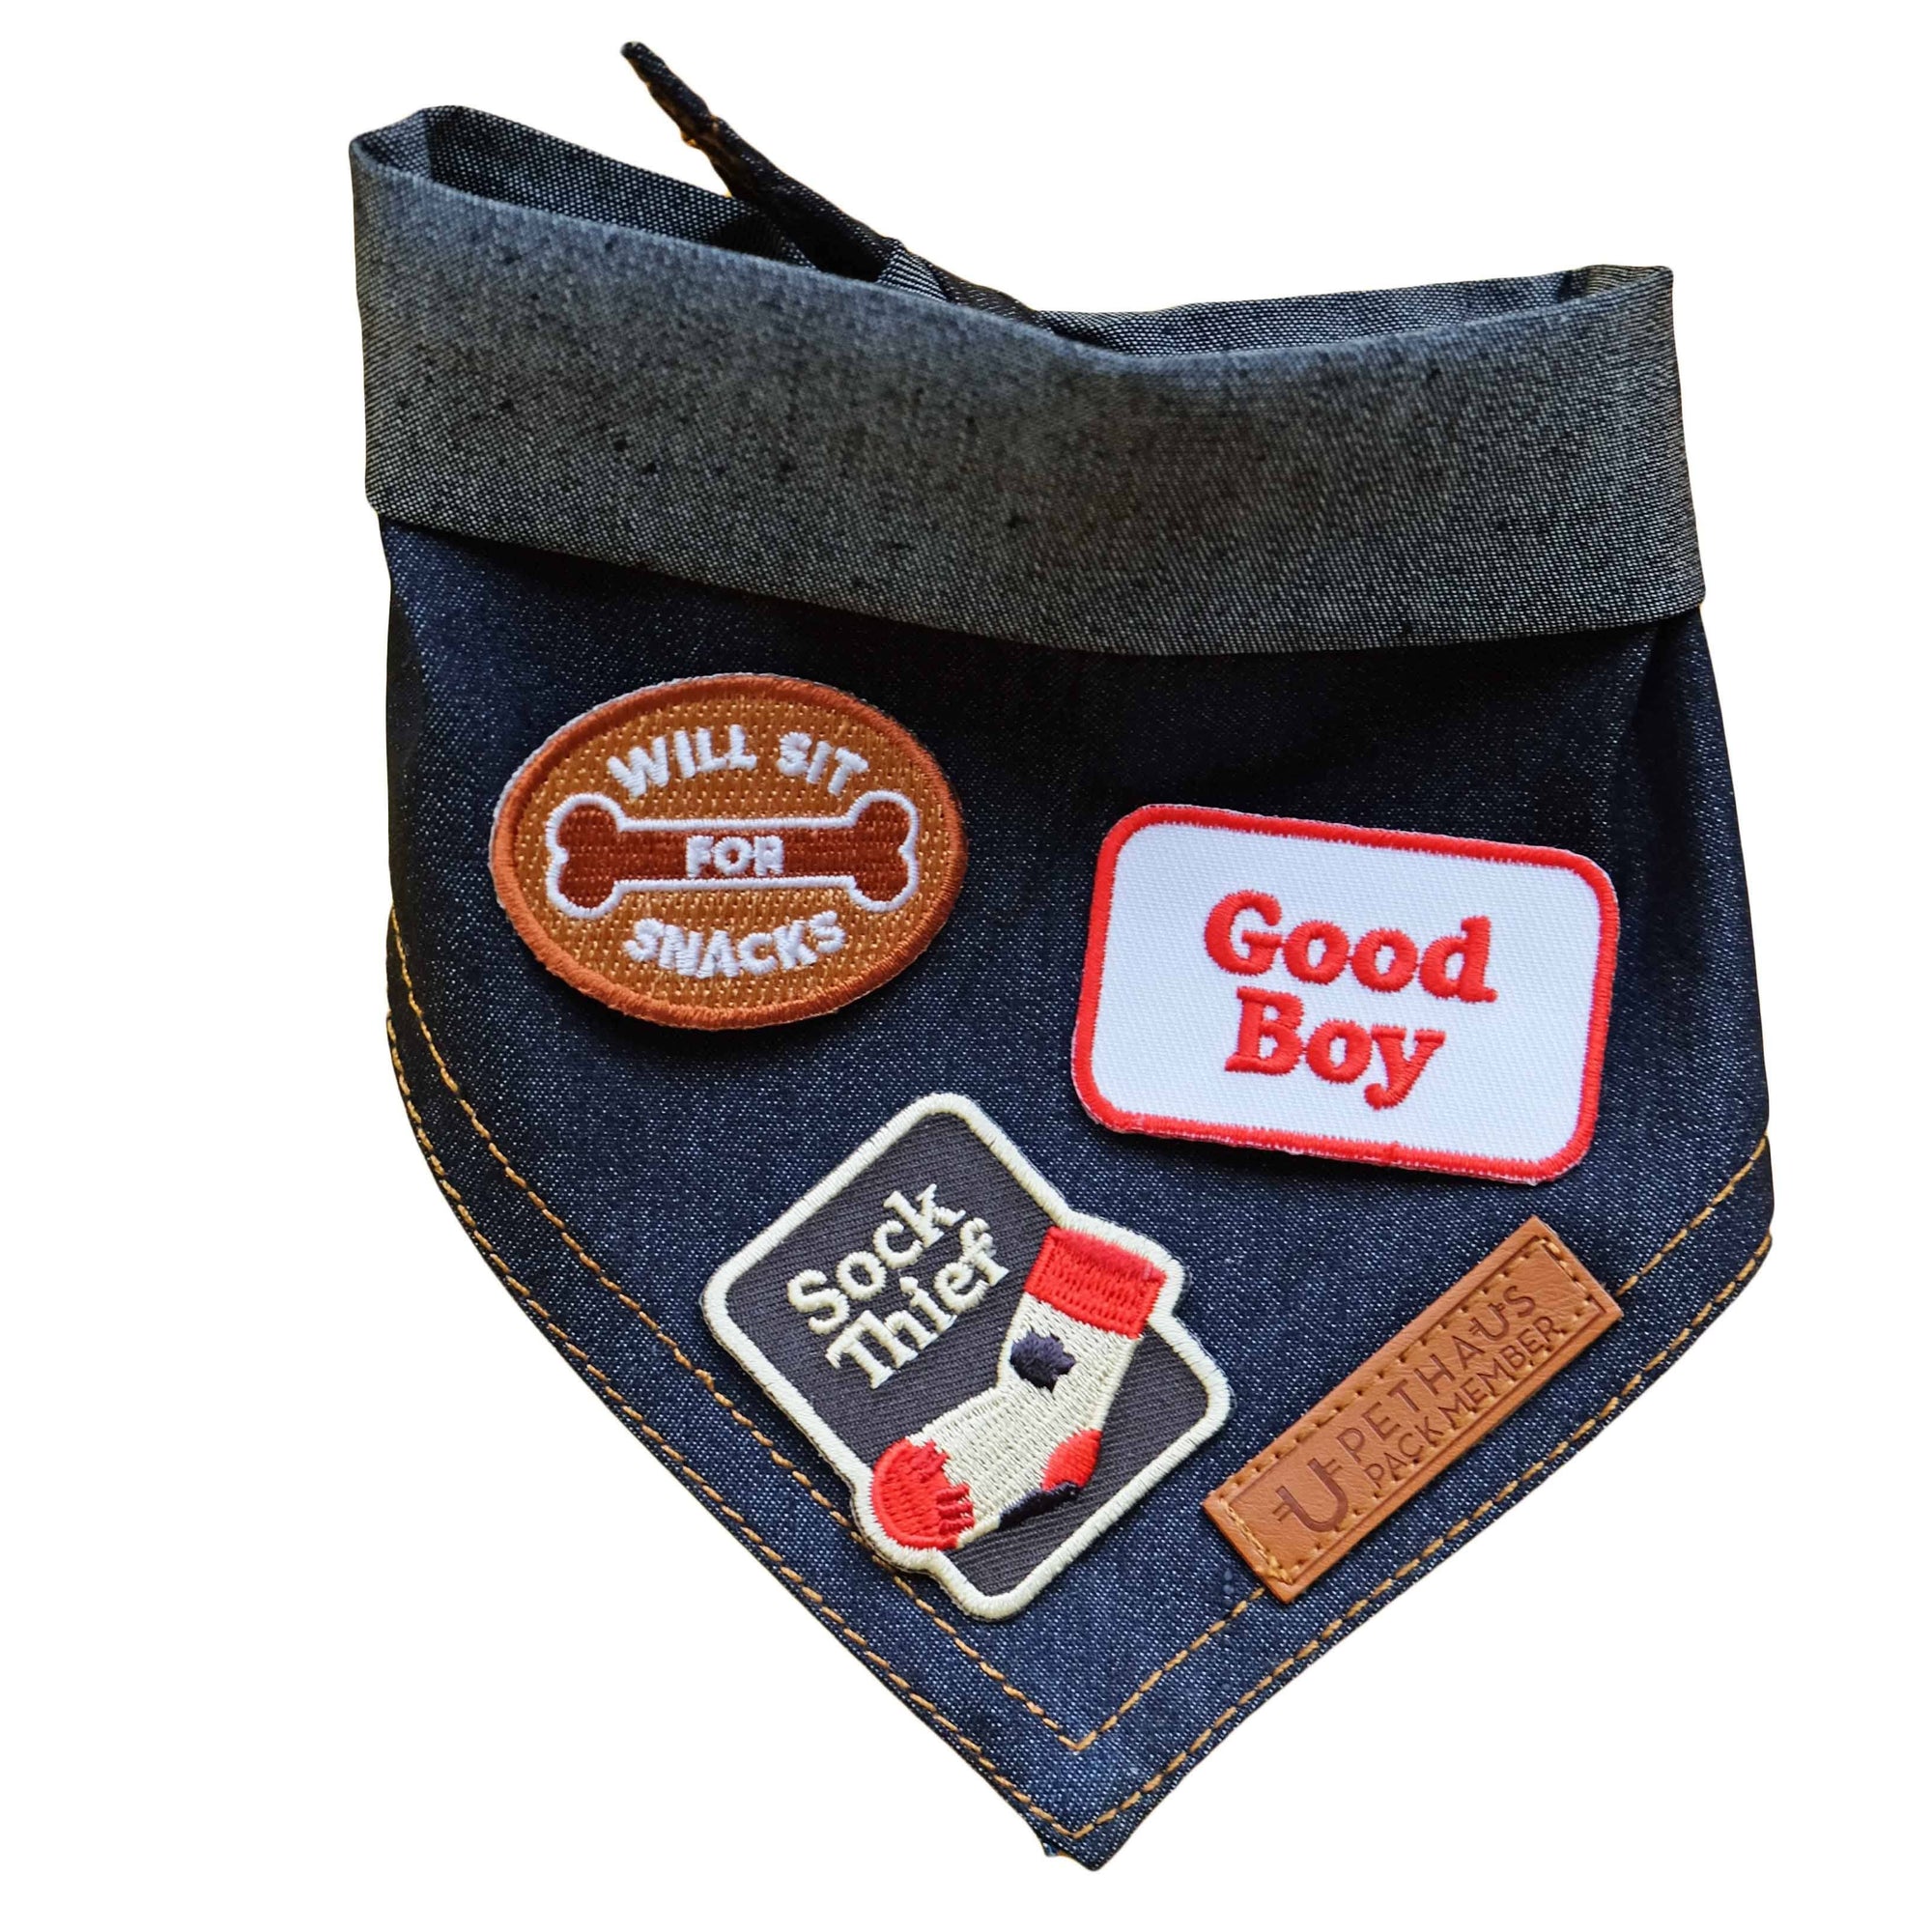 Sock thief embroidered patch for dogs by Scouts honour, funny dog patch